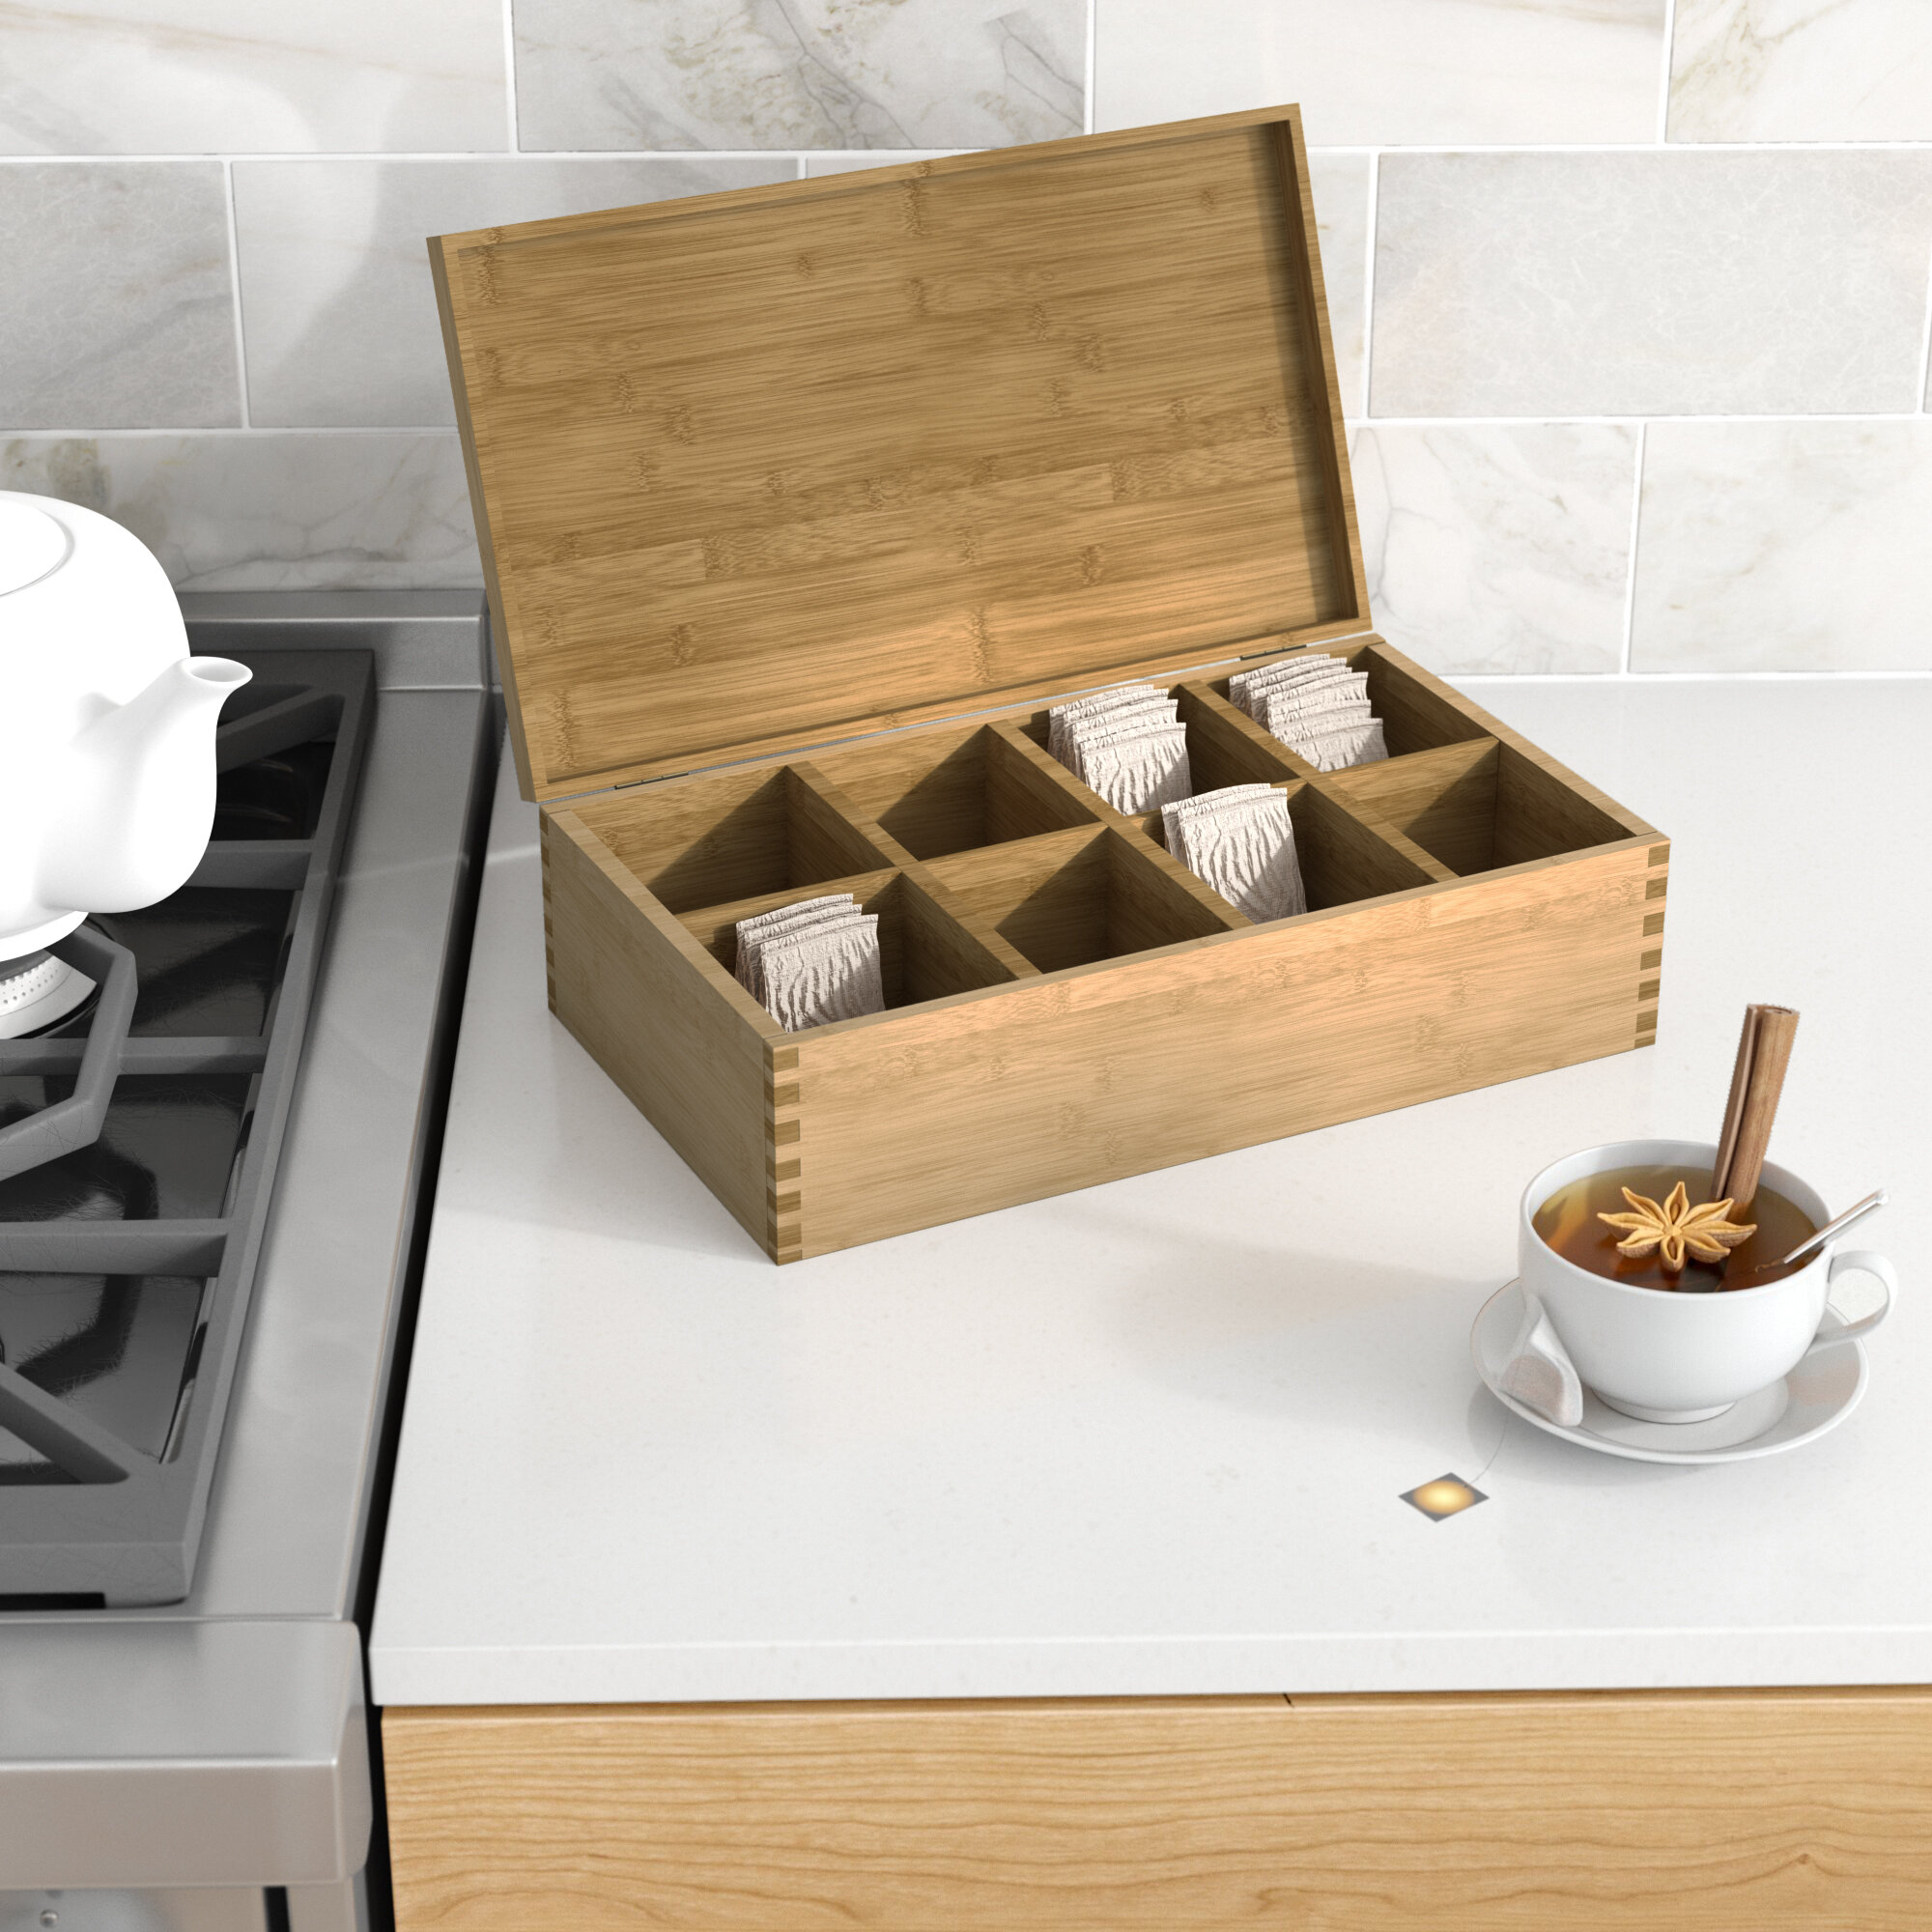 Tea Boxes with Compartments Wooden Organiser Storage White,9-Compartment Bamboo Tea Box with Lid Coffee Tea Bag Storage Holder Organizer,for Kitchen Cabinets 